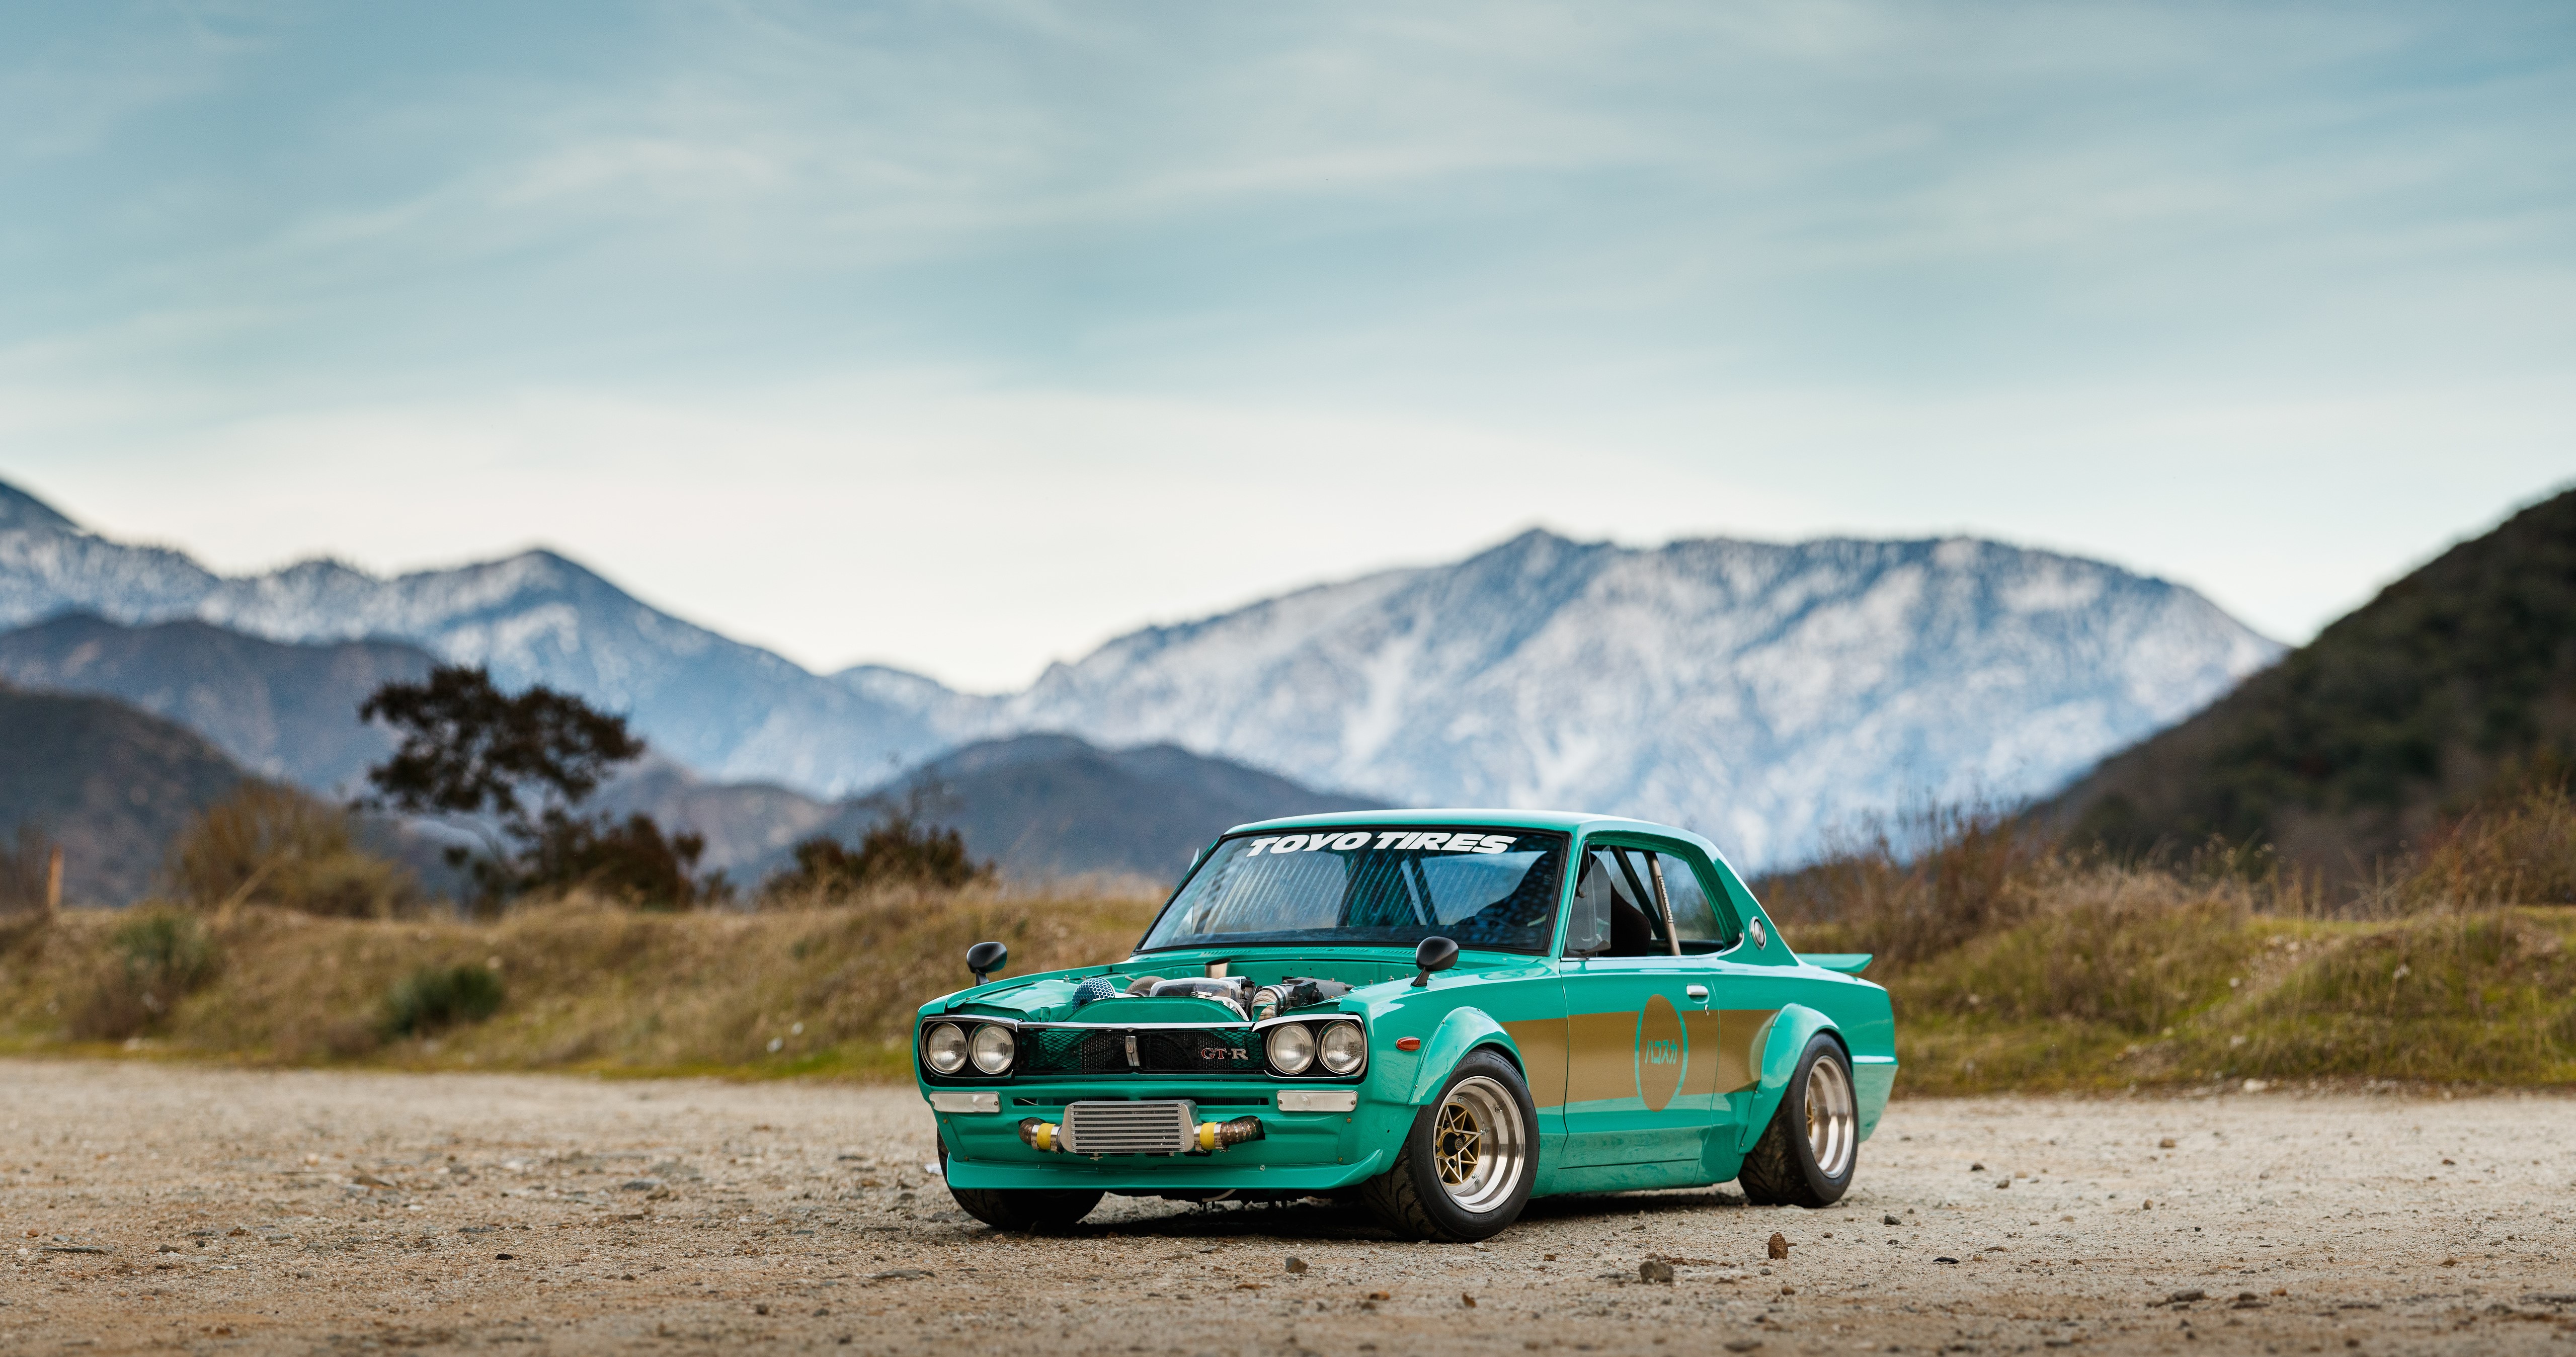 General 5120x2697 Nissan Skyline C10 teal stance (cars) classic car Japanese cars Larry Chen bodykit